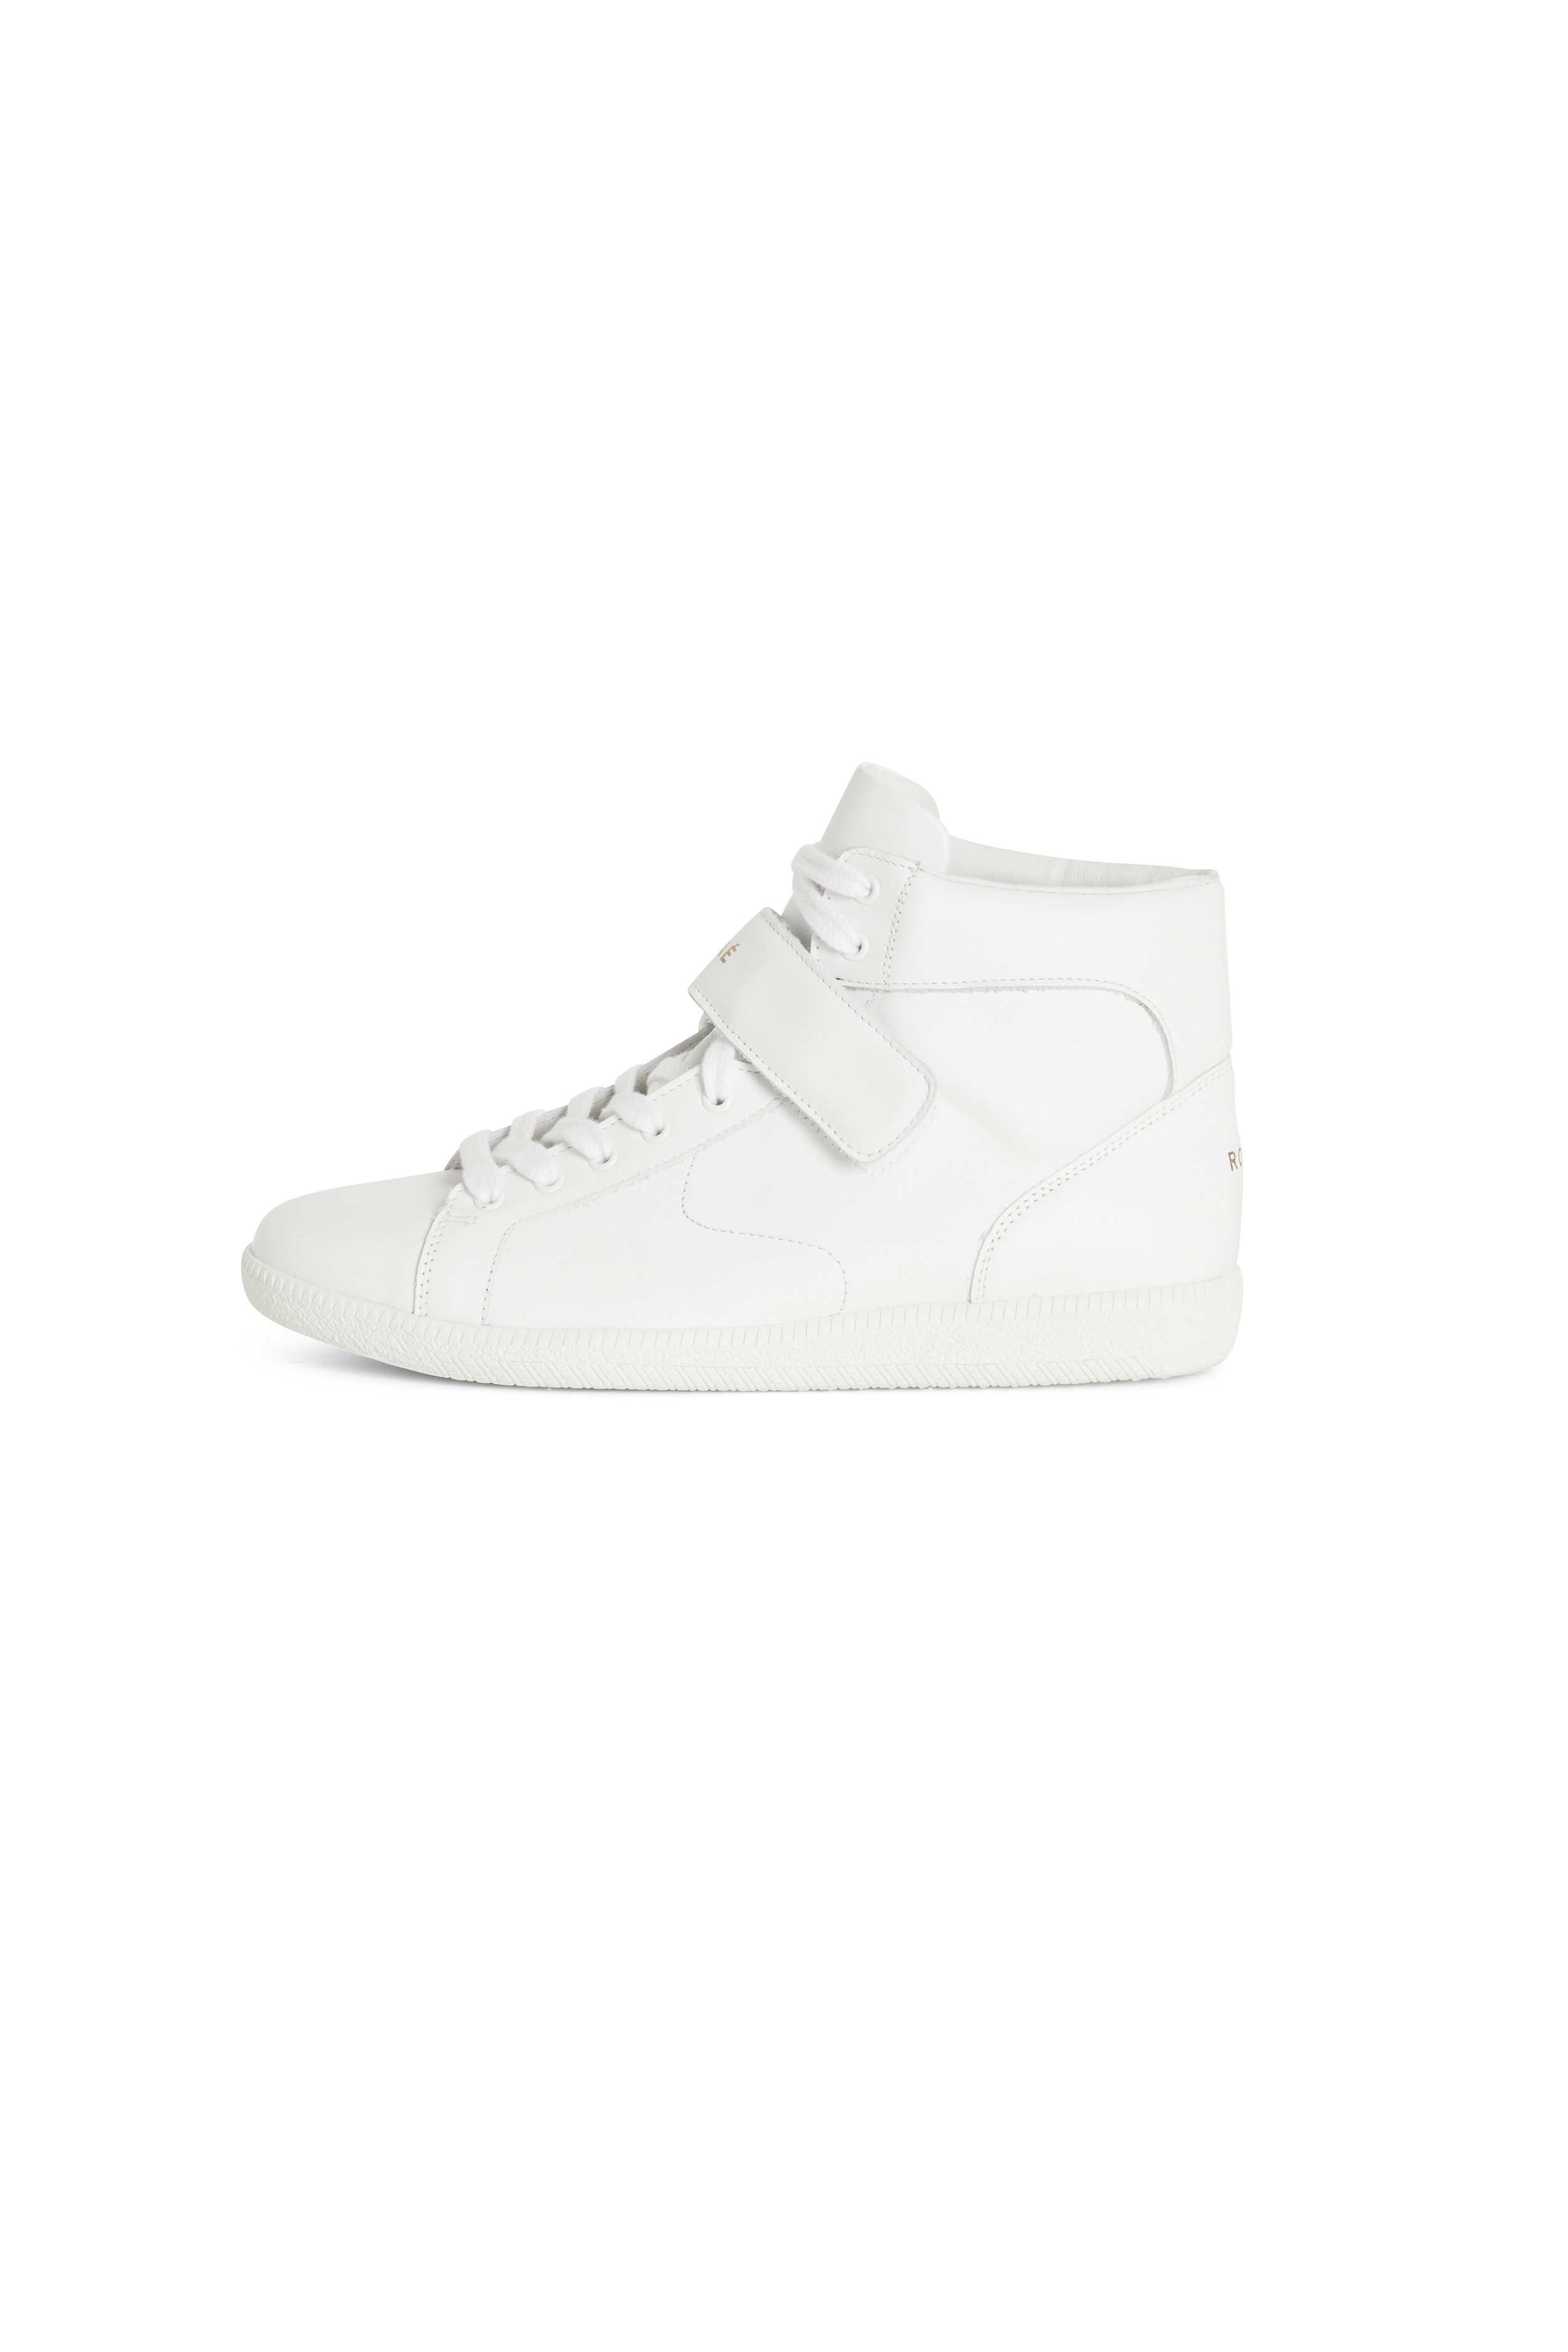 Les Dugommier - The Coolest High-Rise Sneakers with a Vintage Feel ...